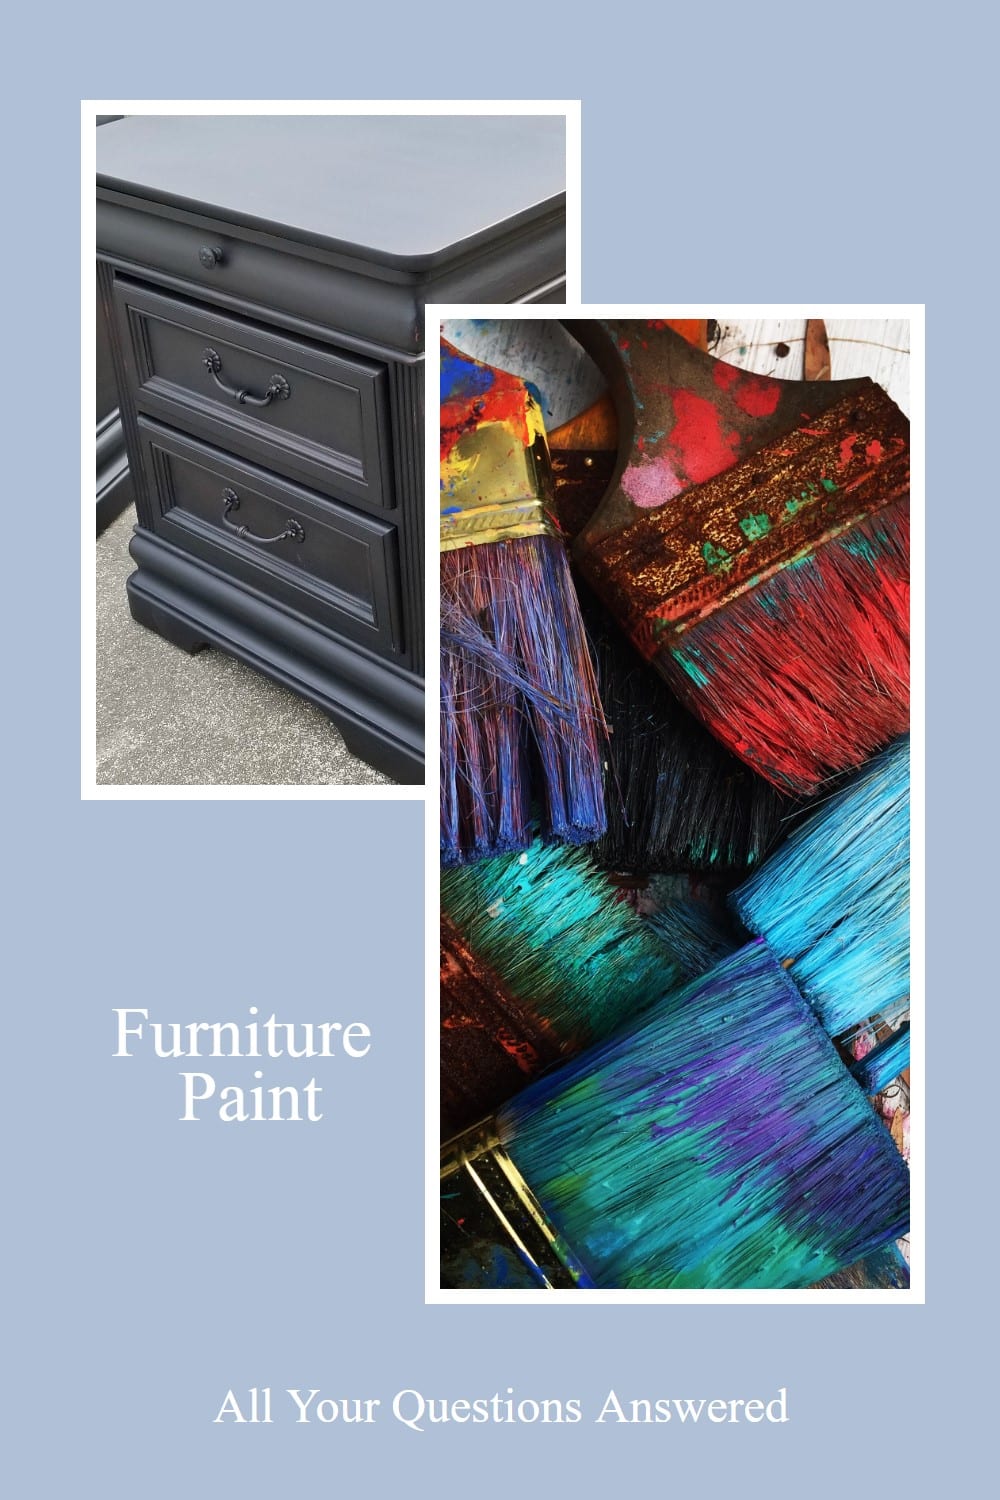 Furniture paint tips for your next hand-me-down project. Do you have a "new to you" dresser you want to update? All of your questions answered. via @repurposedlife